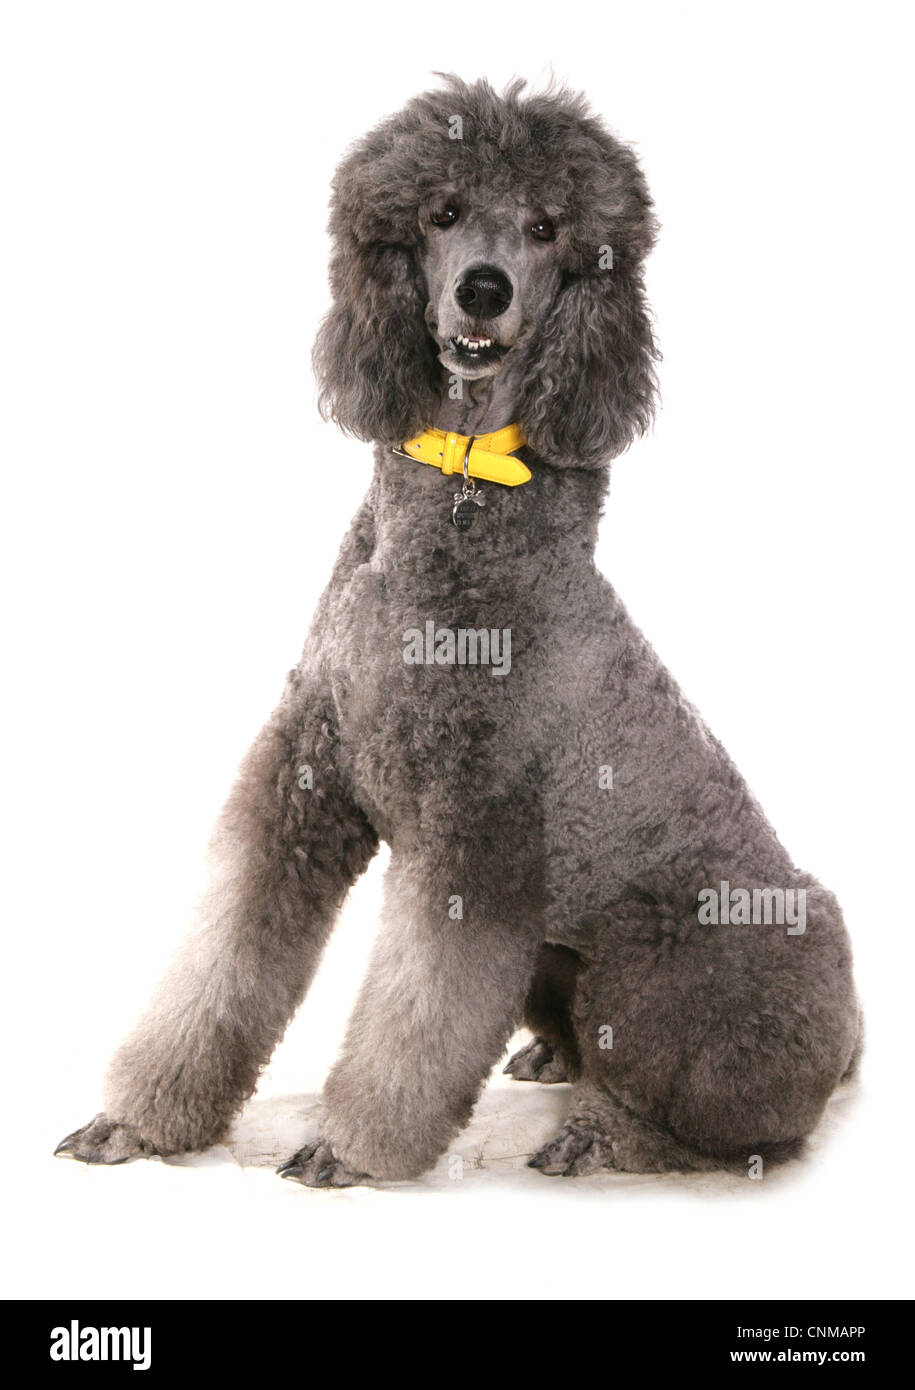 Domestic Dog, Giant Poodle, adult, sitting, with collar and tag Stock Photo